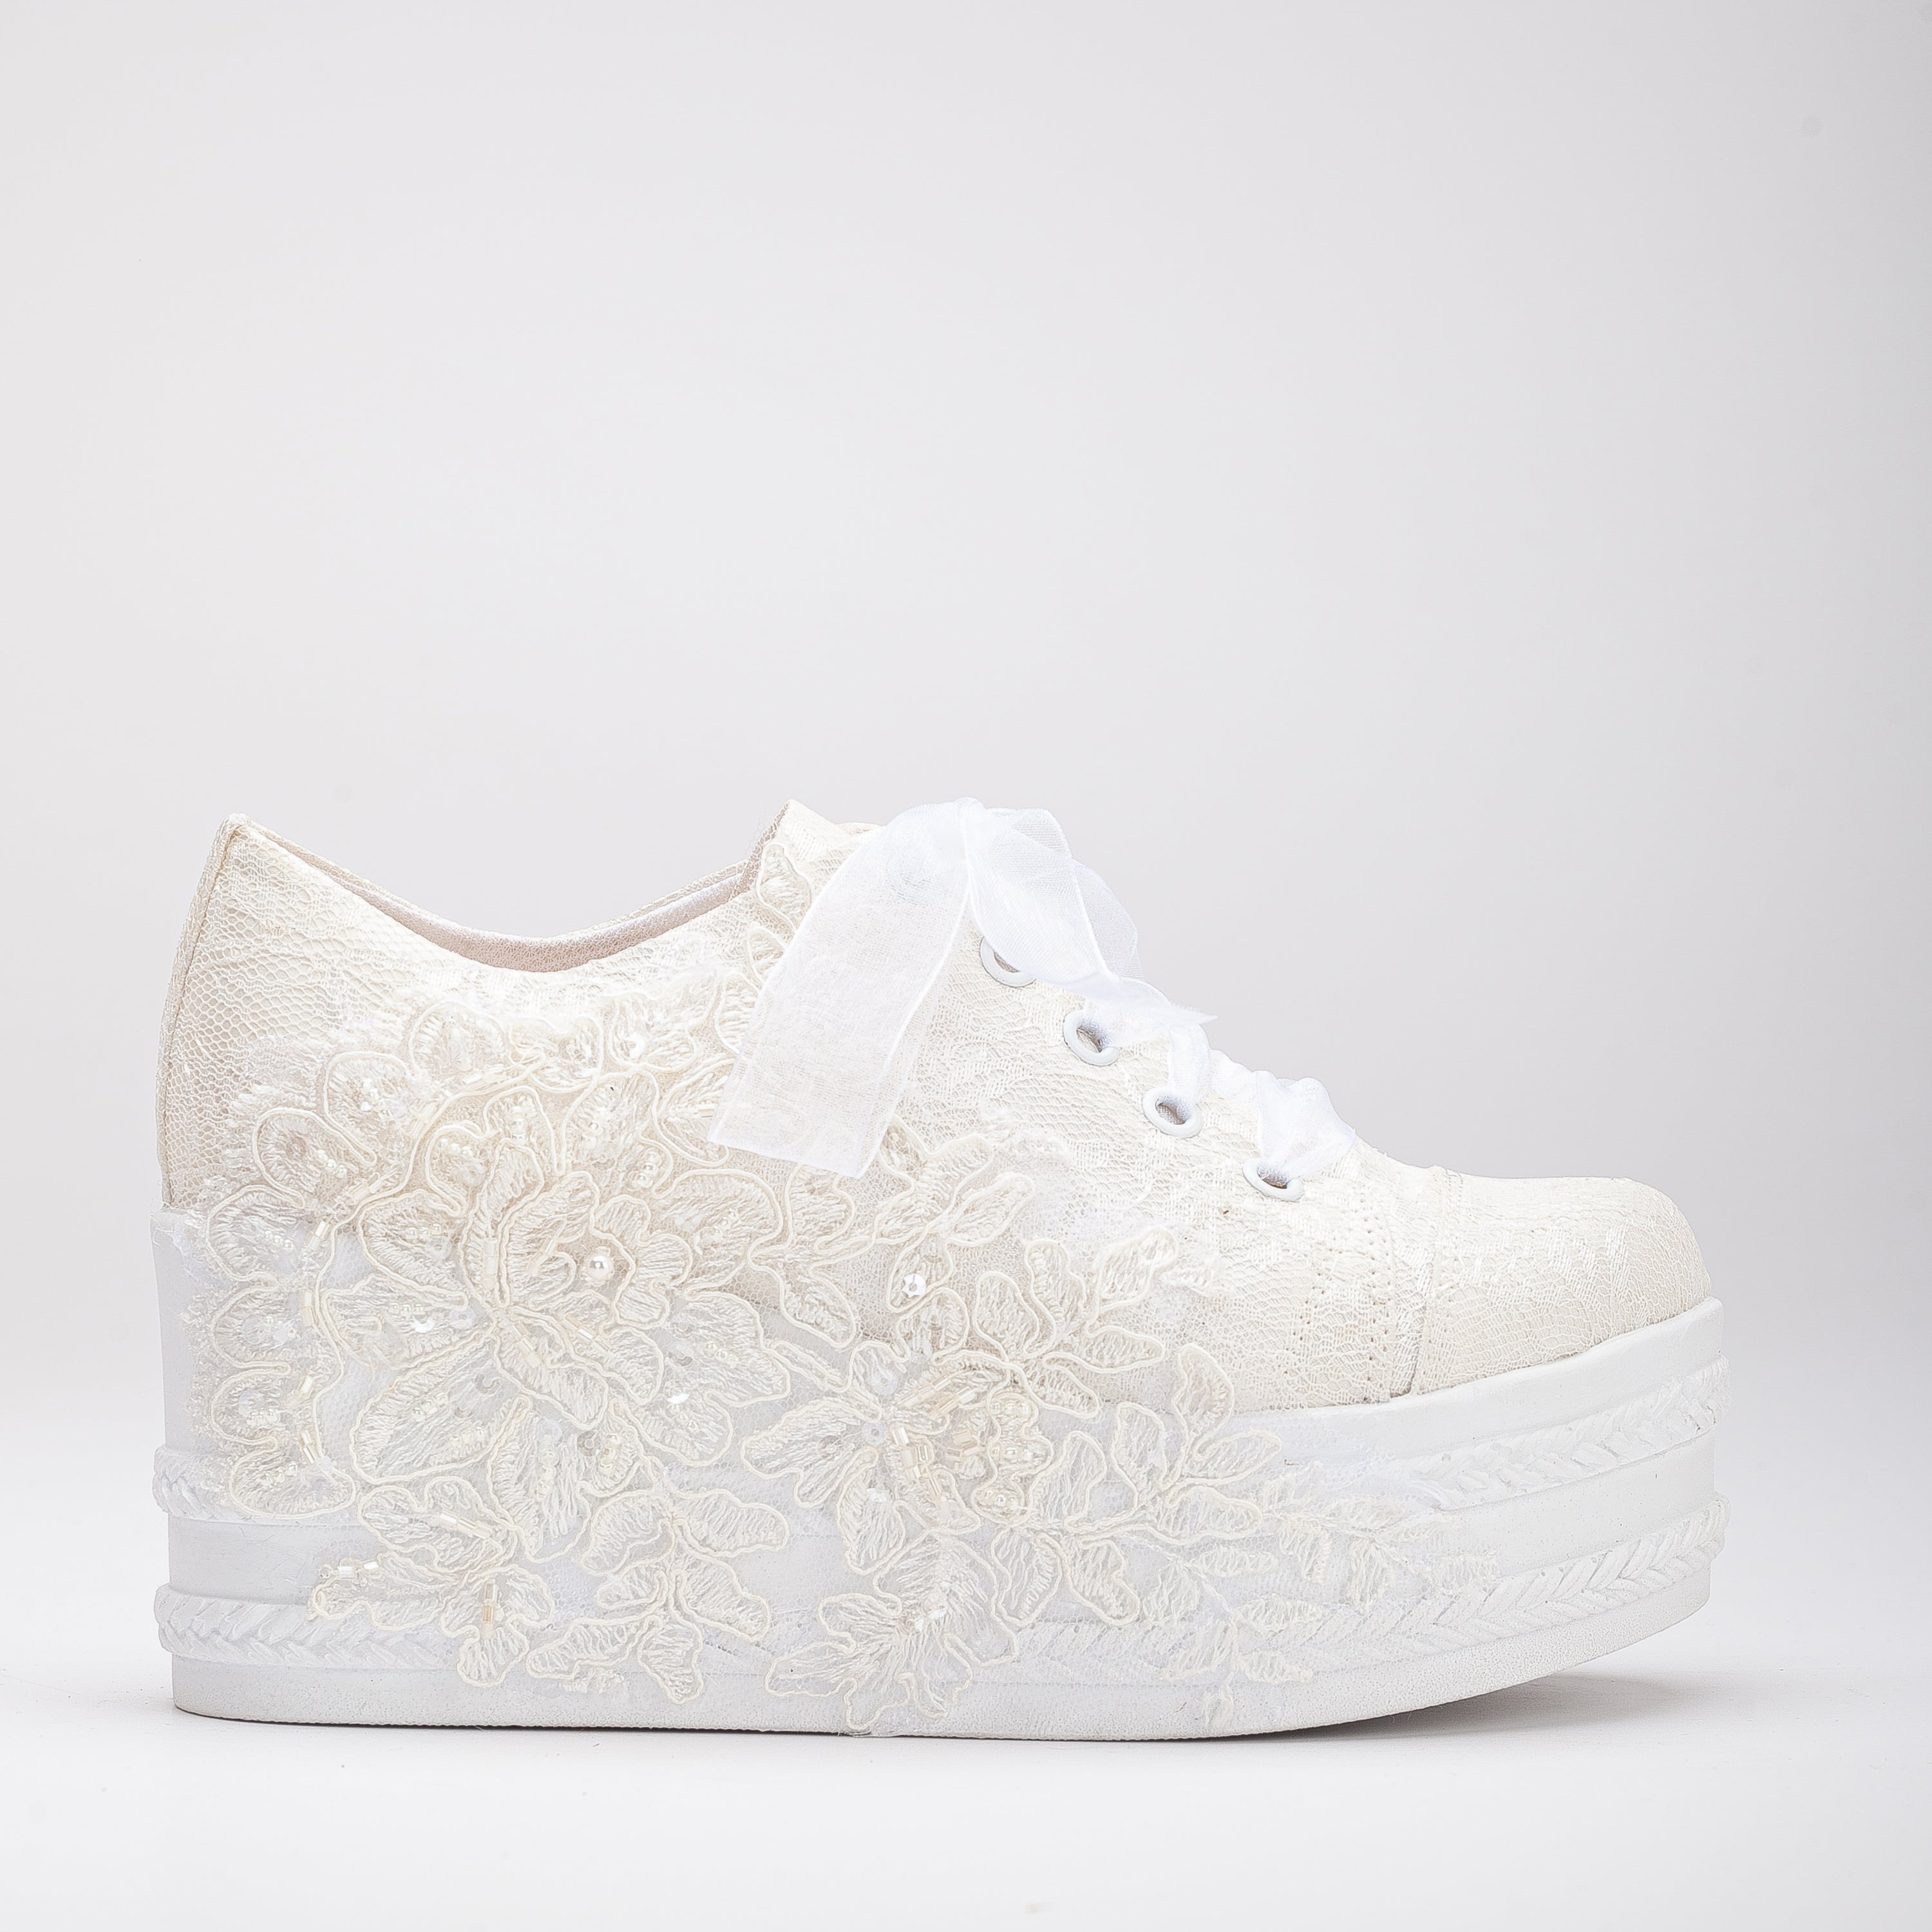 Claudine - Ivory Lace High Heel Wedding Sneakers